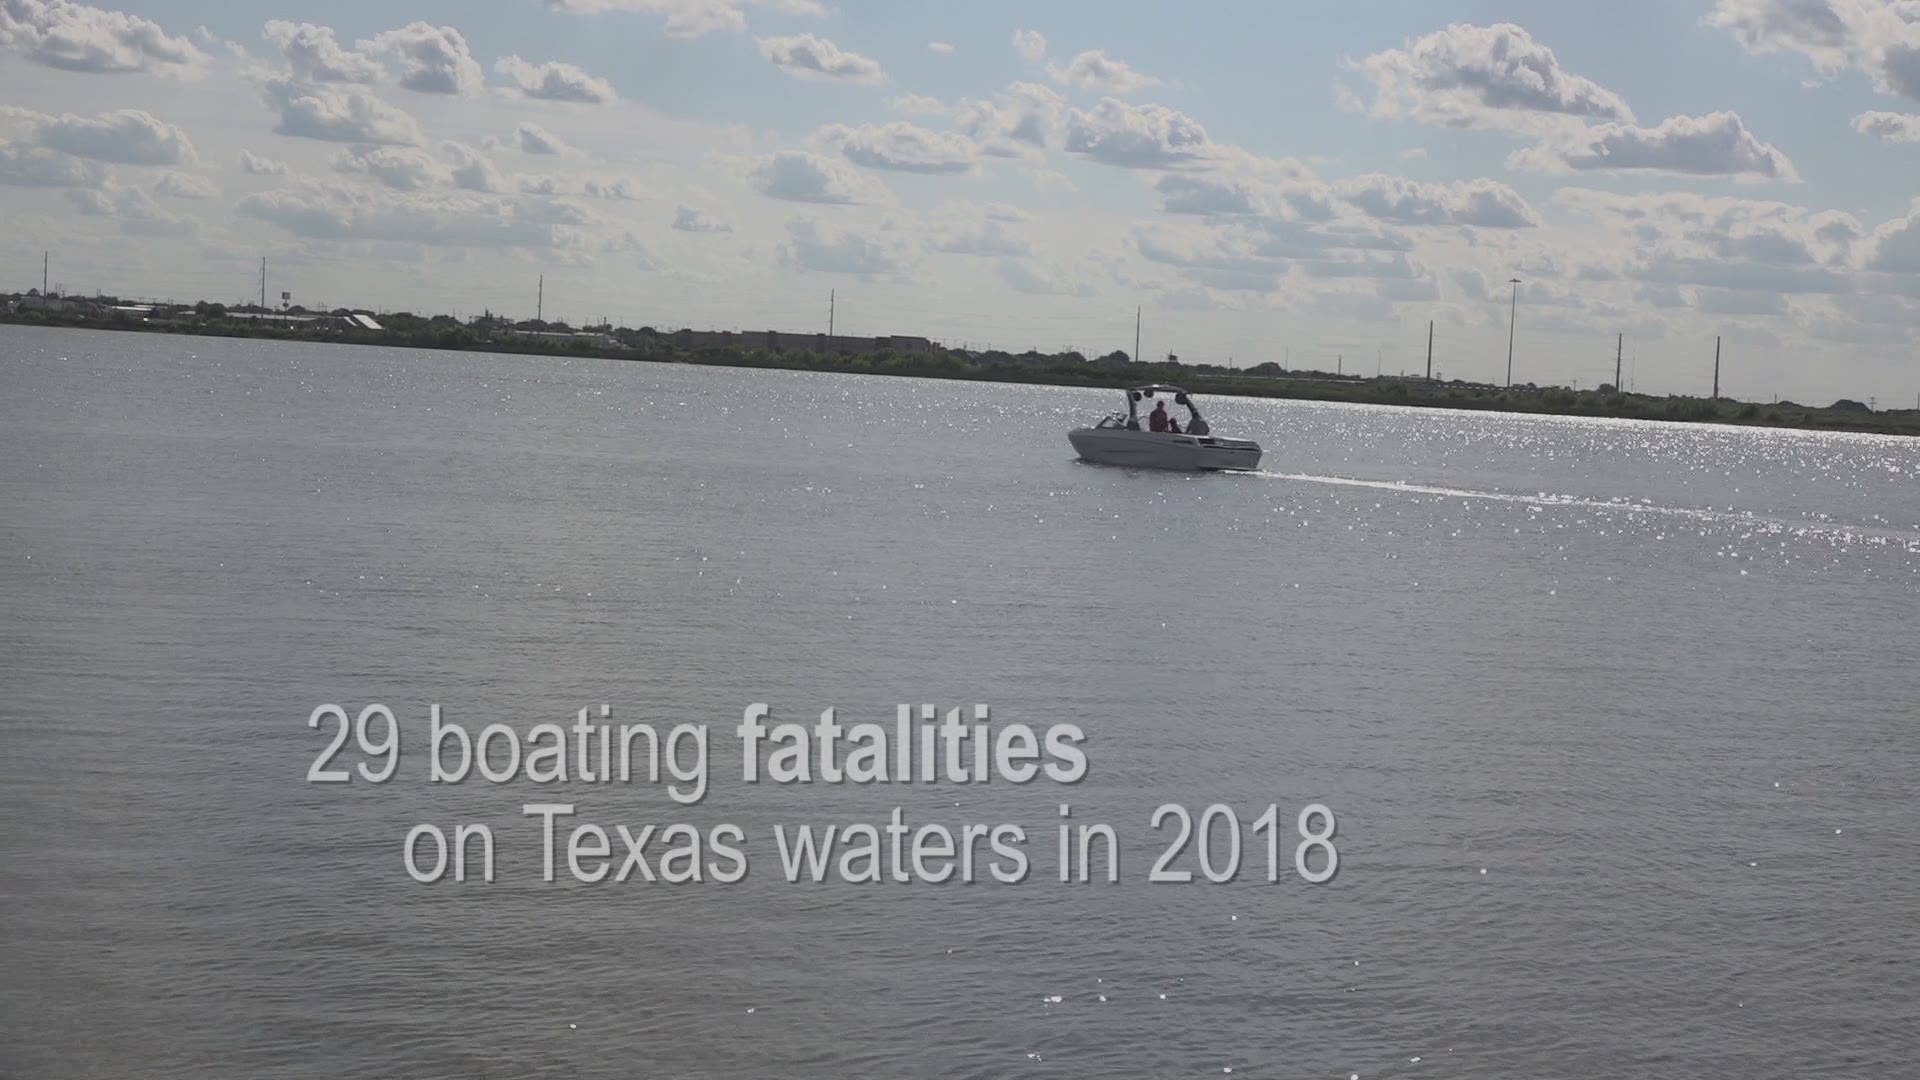 TPWD: 29 fatalities hundreds of accidents on Texas waters last year.